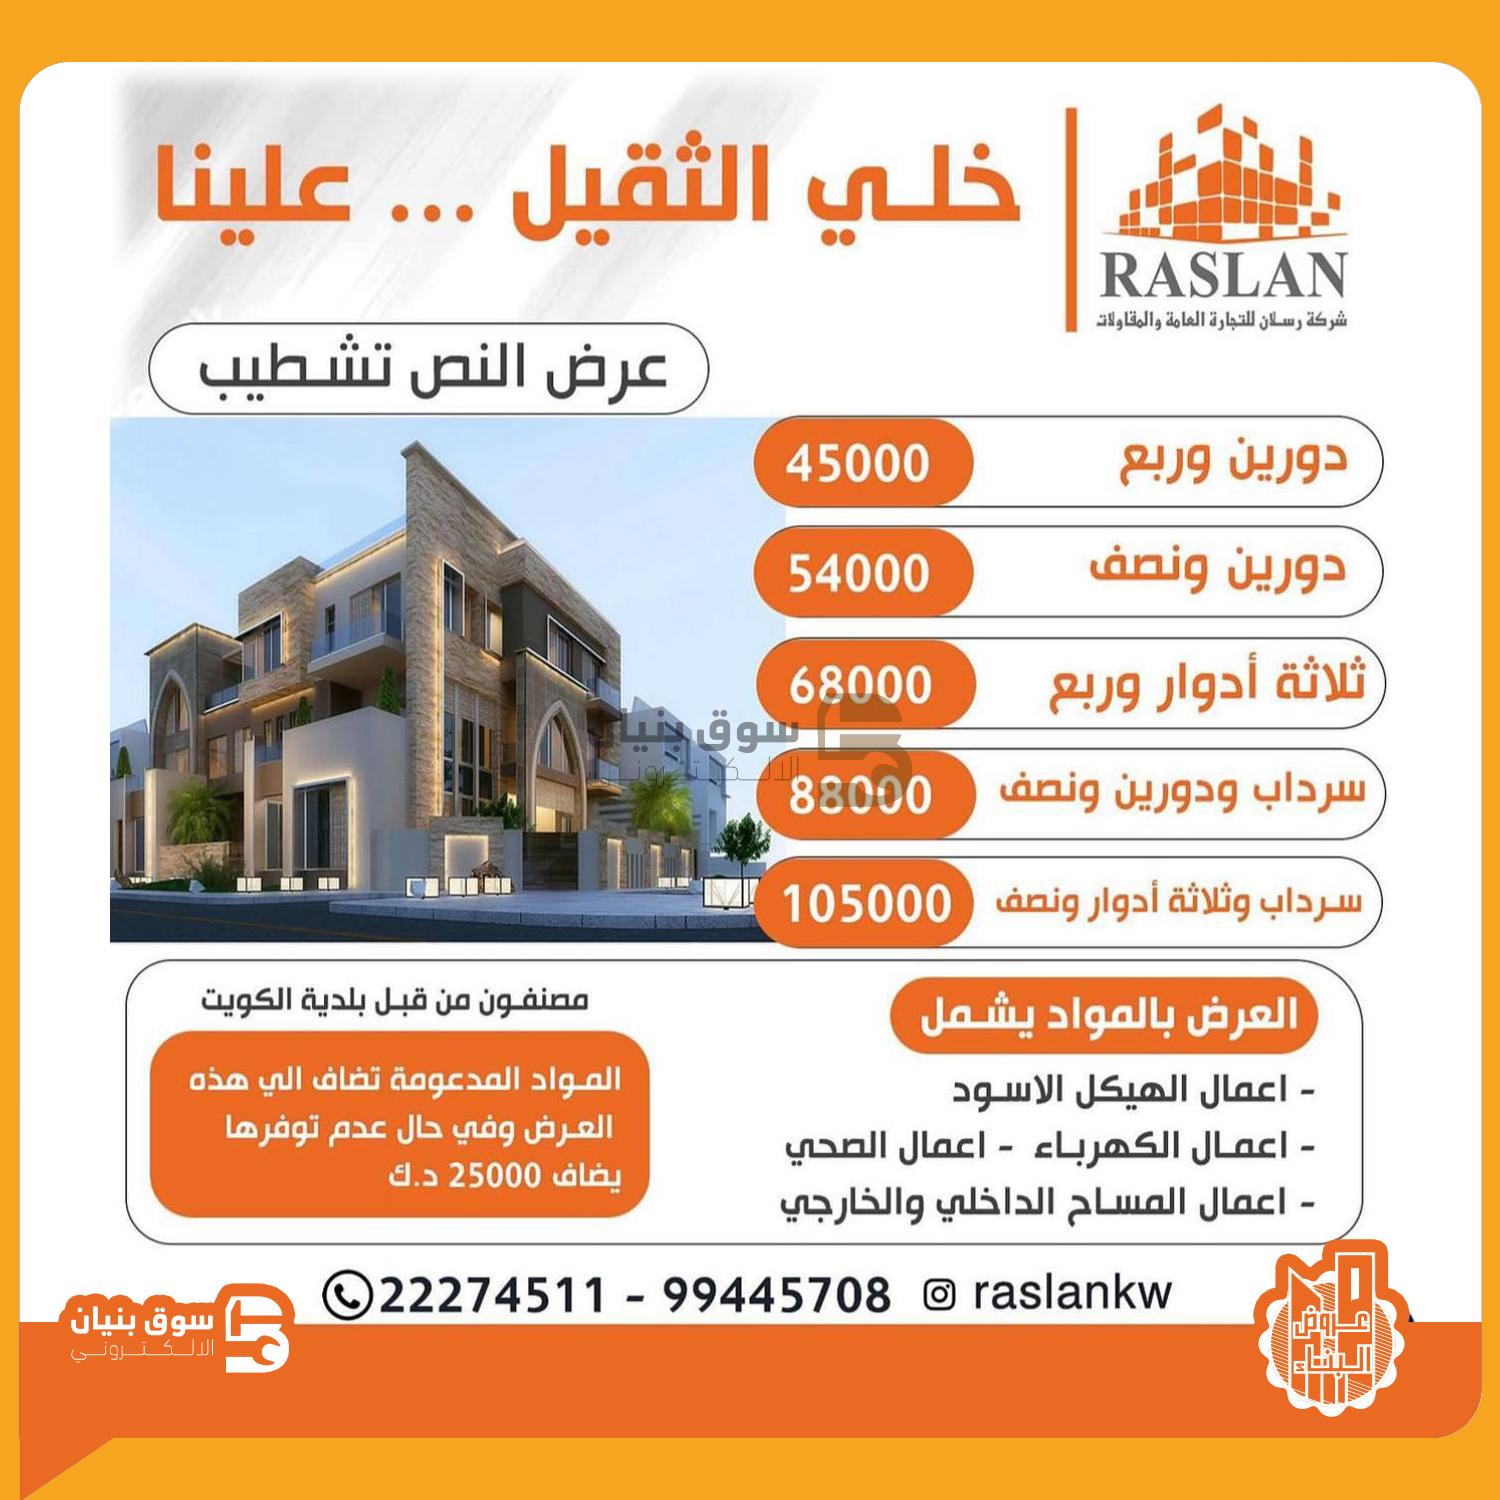 offer from raslan General Trading and Contracting Company